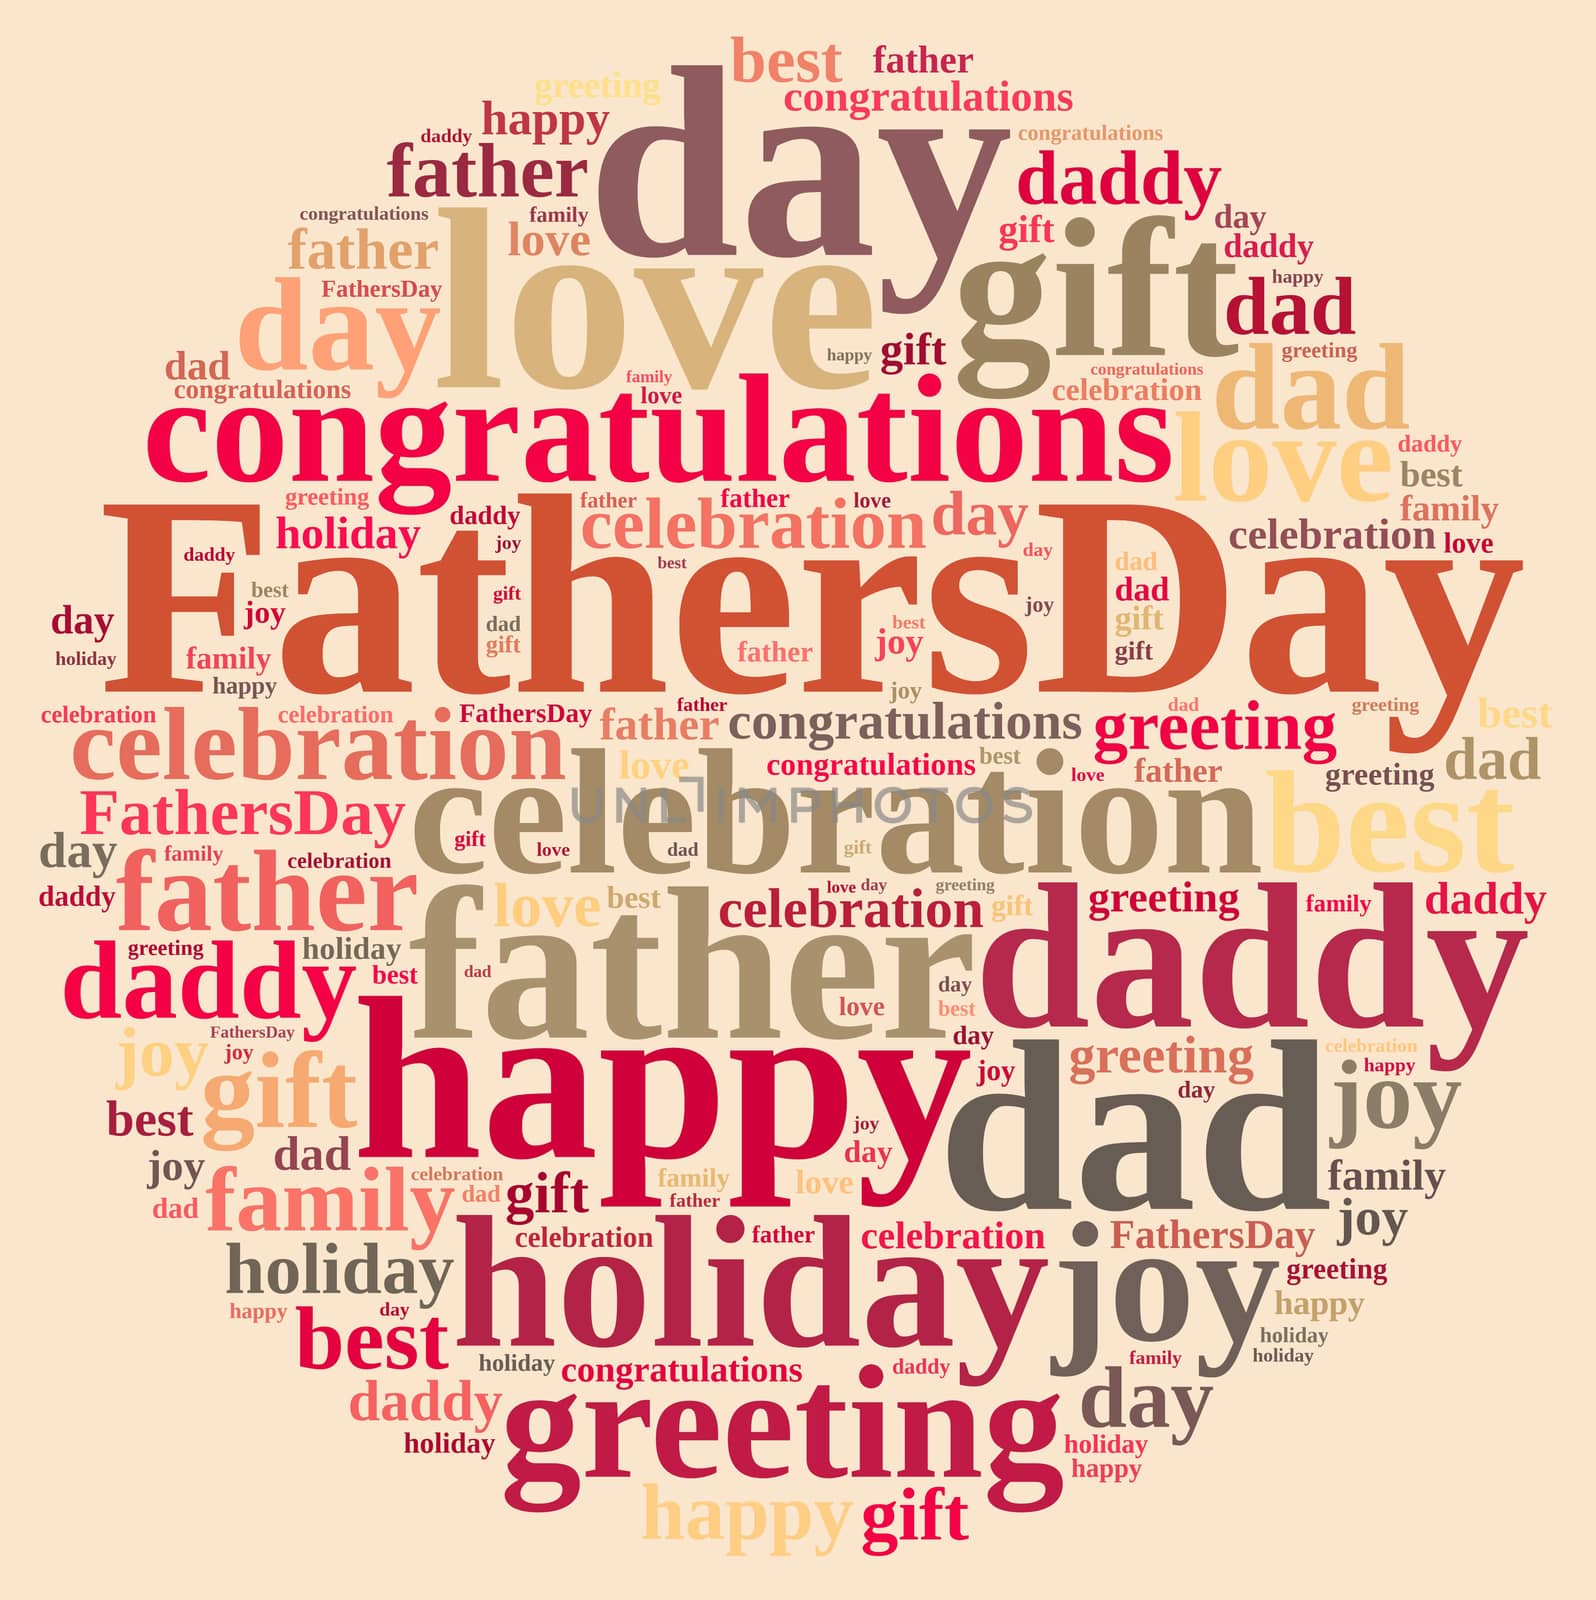 Illustration with word cloud about Fathers Day.